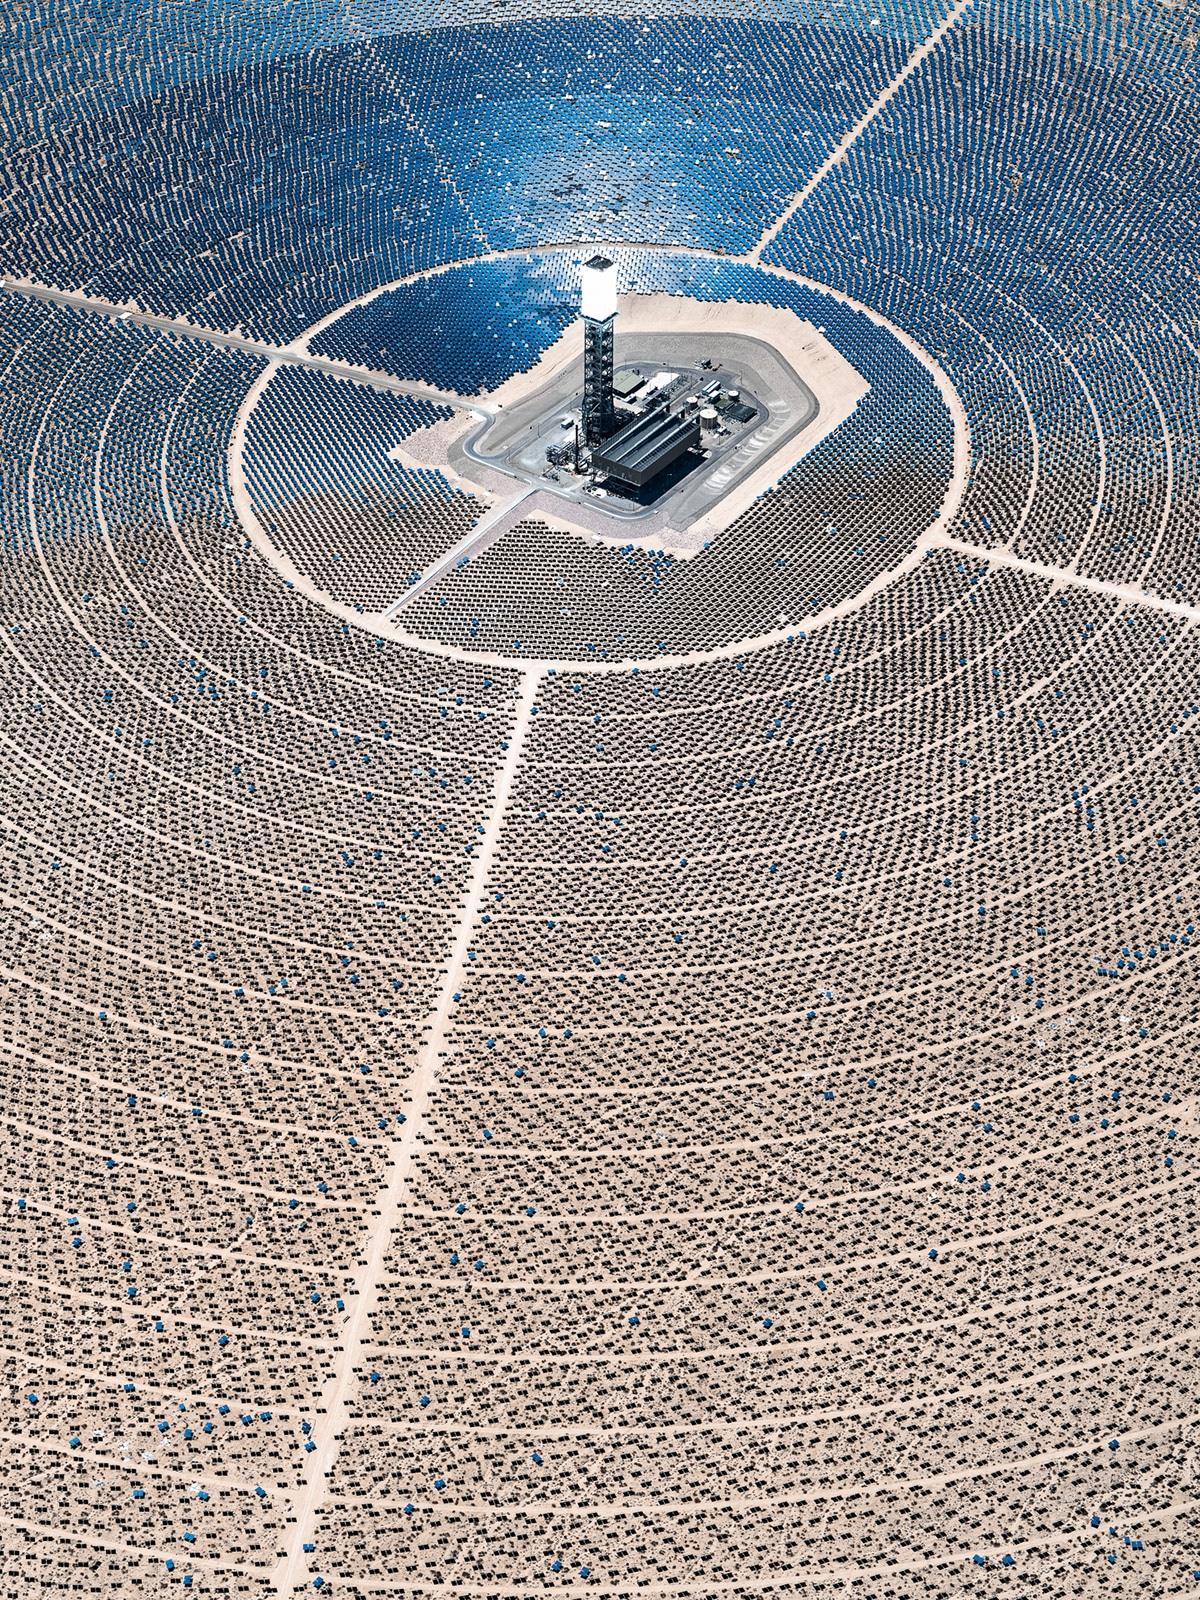 Concentric Rows of Solar Panels